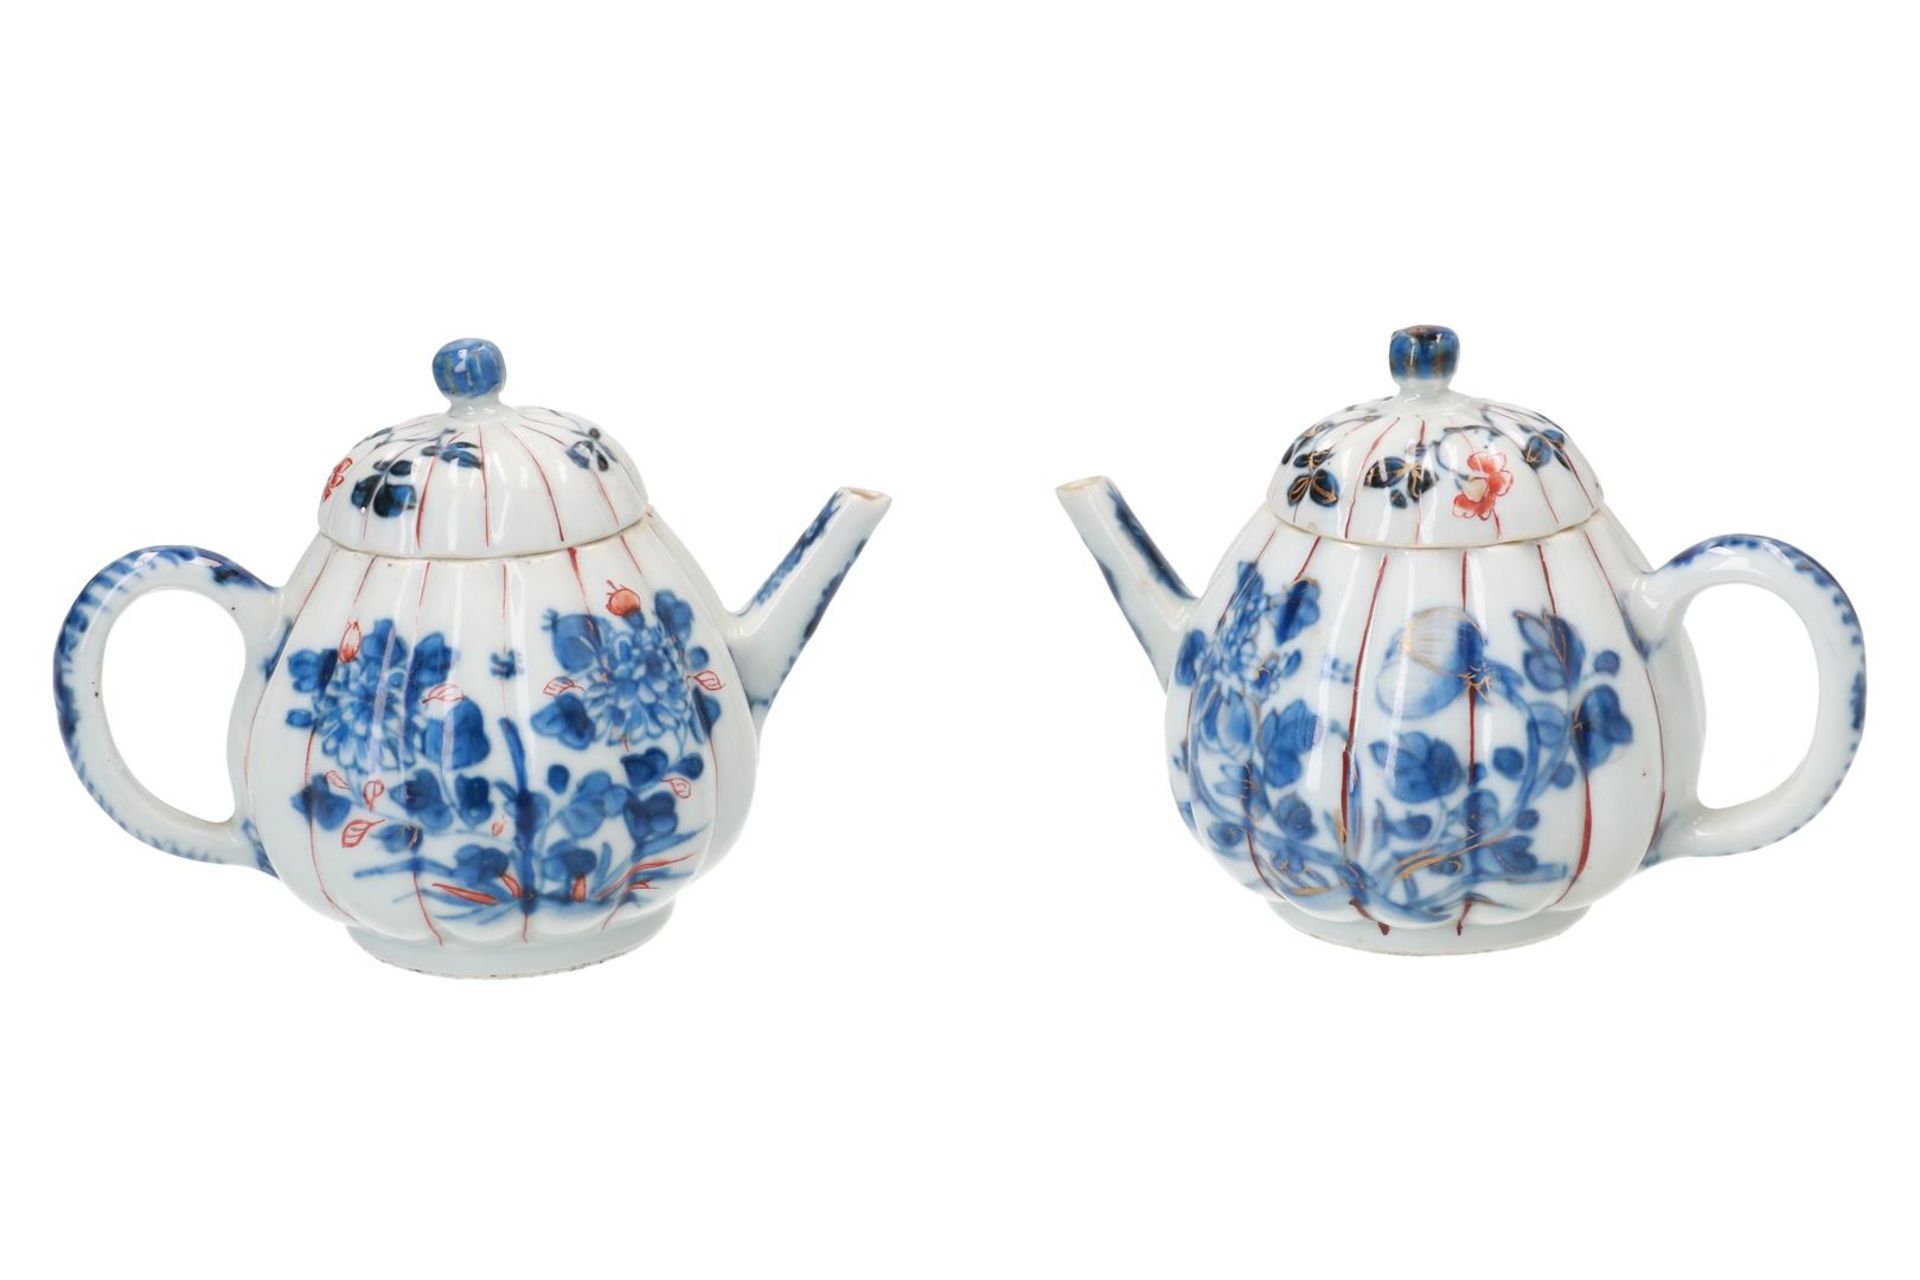 A pair of Imari porcelain teapots with lobbed belly and floral decor. Unmarked. China, 18th century. - Image 2 of 6